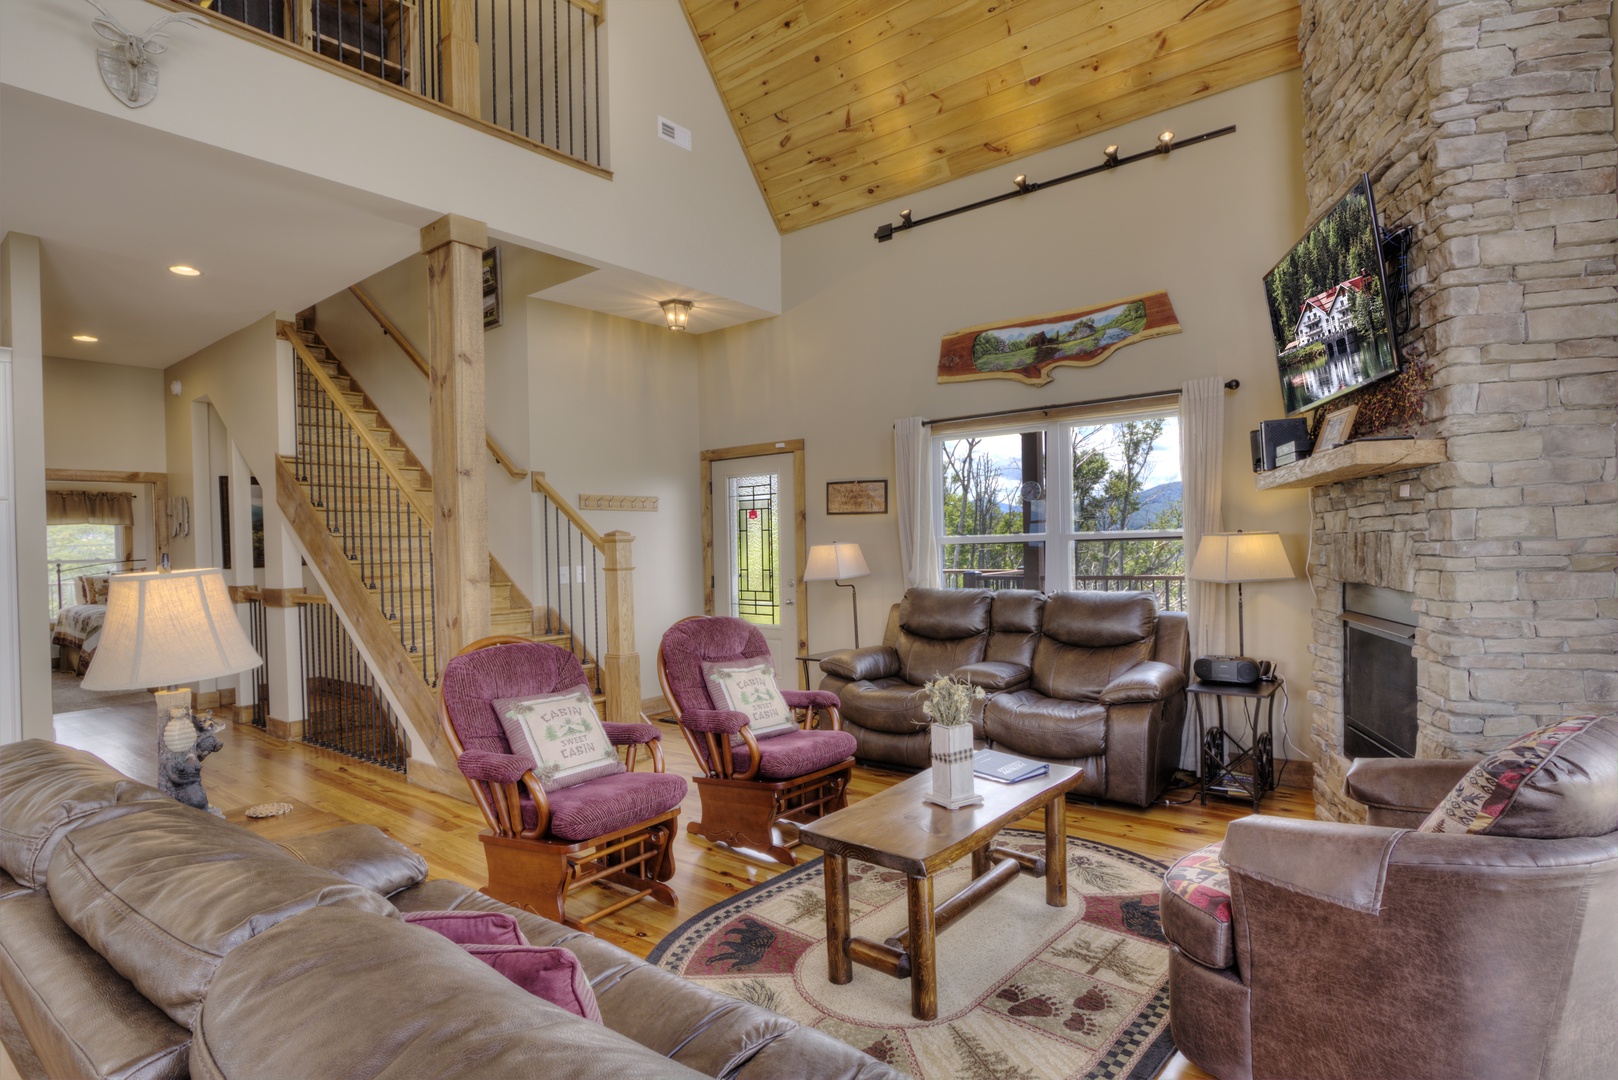 Family room with seating, flat screen, and fireplace at The Best View Lodge, a 5 bedroom cabin rental located in gatlinburg